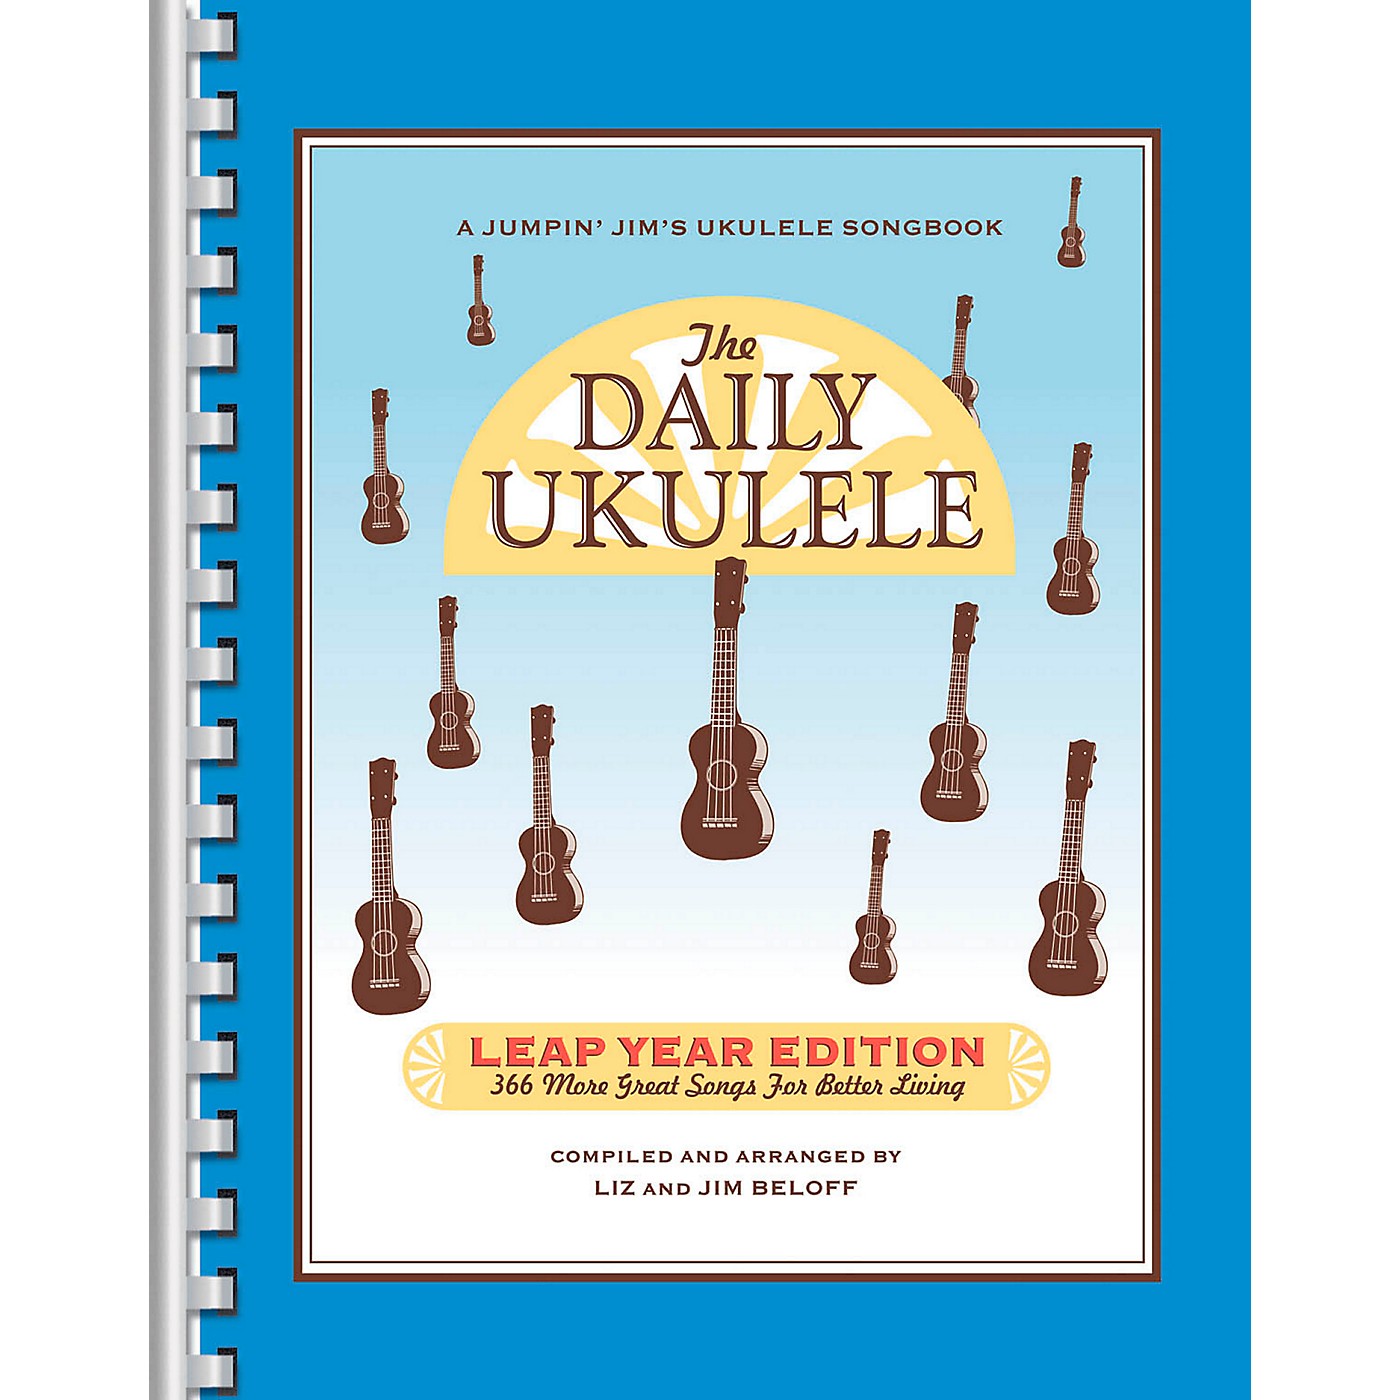 Flea Market Music The Daily Ukulele Songbook - Leap Year Edition (366 More Songs for Better Living) thumbnail